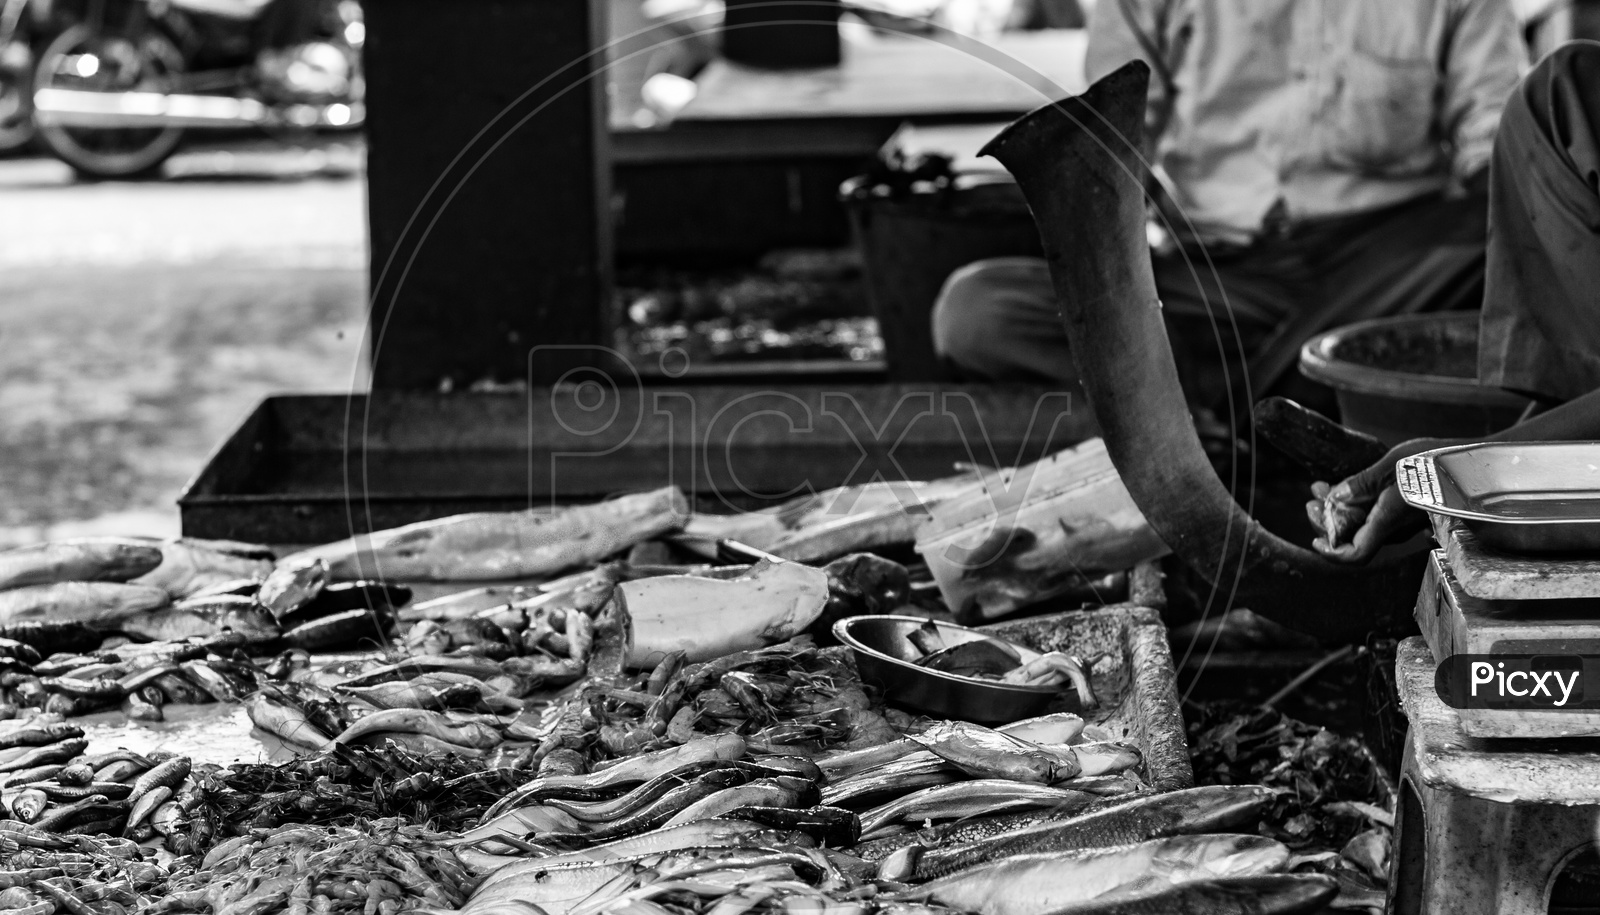 Hilsa Rohu Katla Lobster Prawn And Various Types Of Fishes Displayed In Indian Fish Market At Kolkata In Black And White